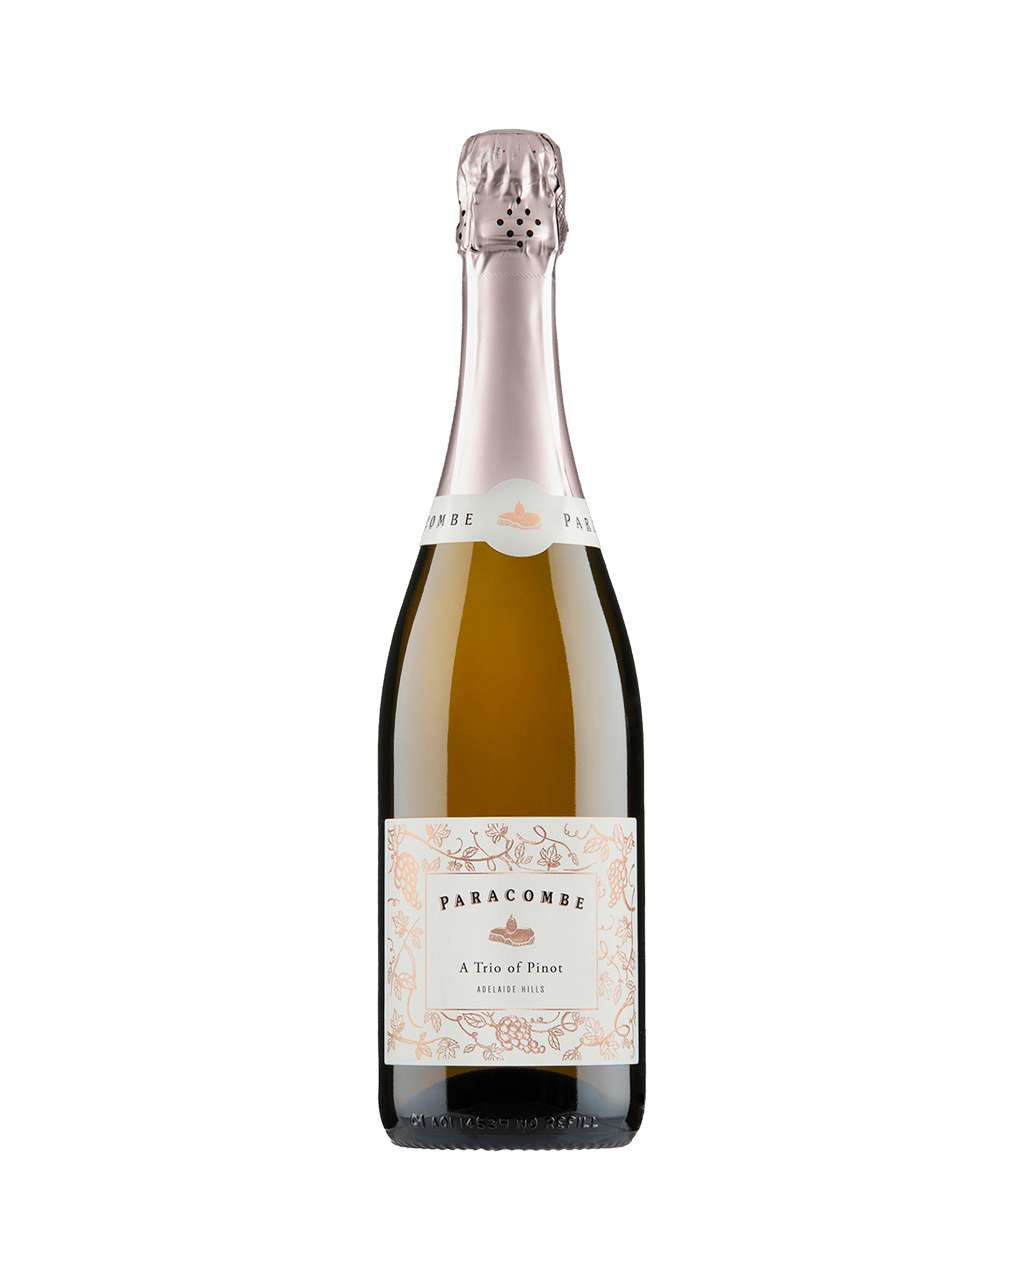 Buy Paracombe A Trio Of Pinot Sparkling Nv Online (Lowest Price ...